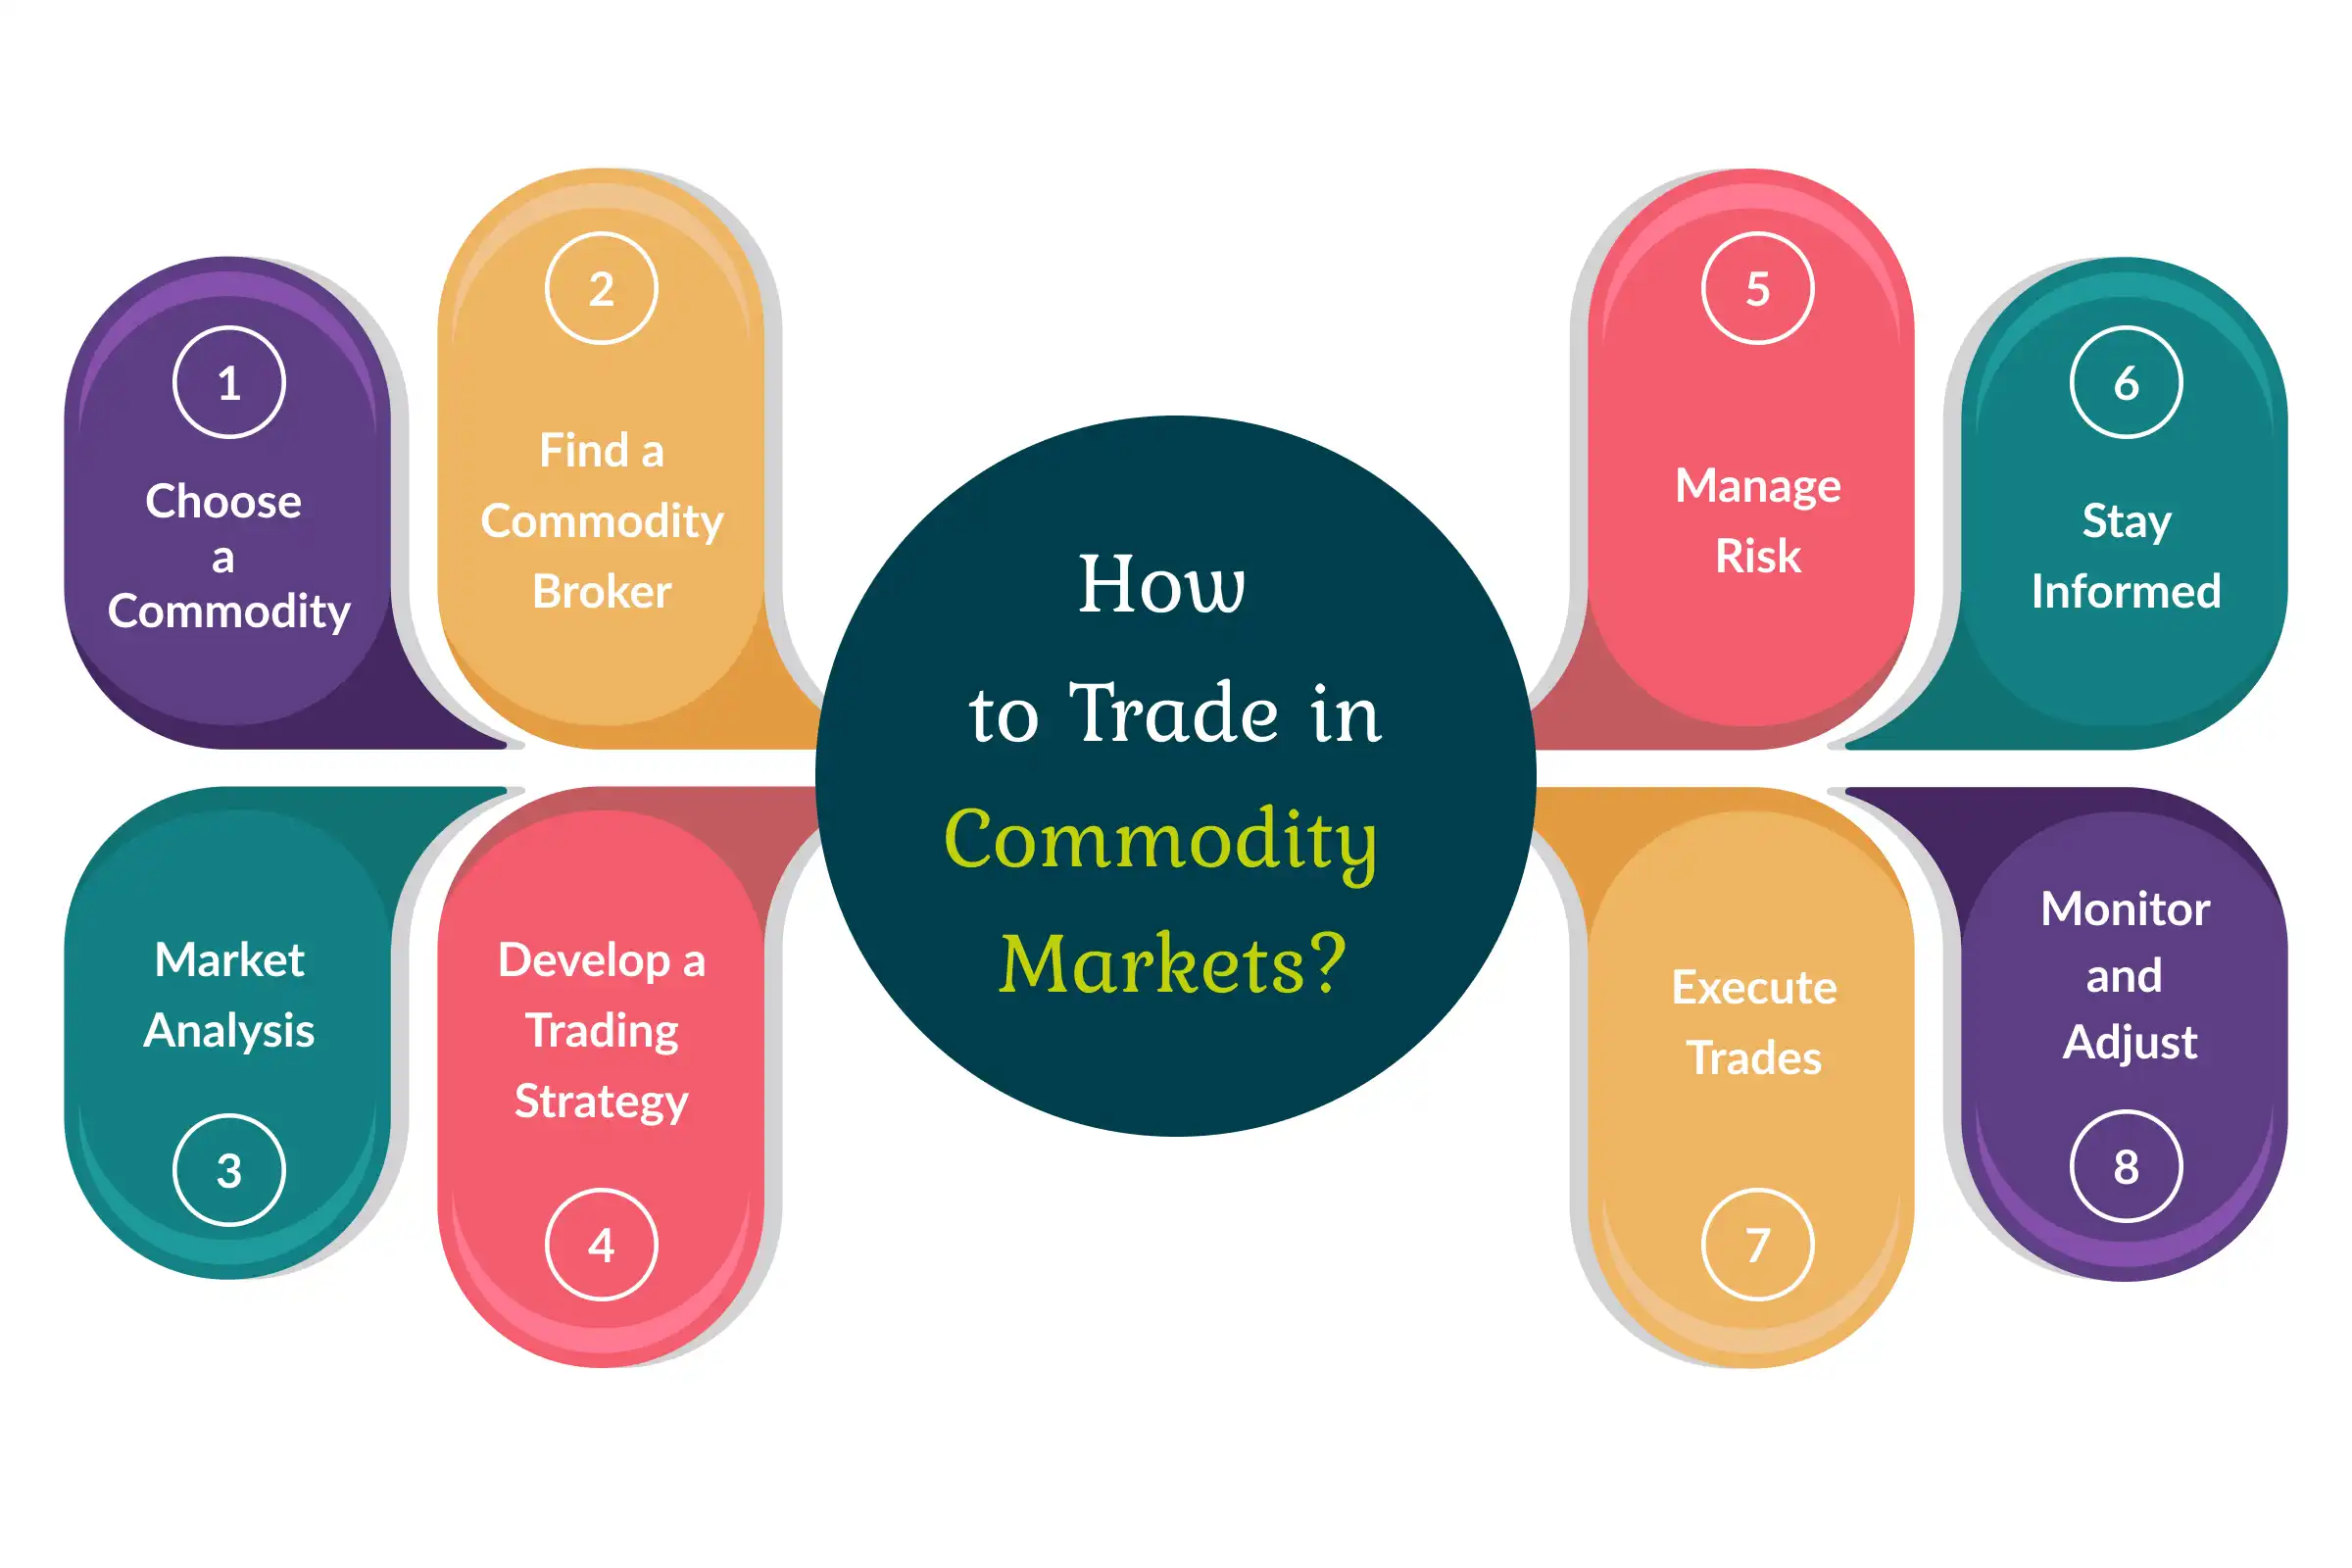 What Are Commodity Markets and How to Trade in Them